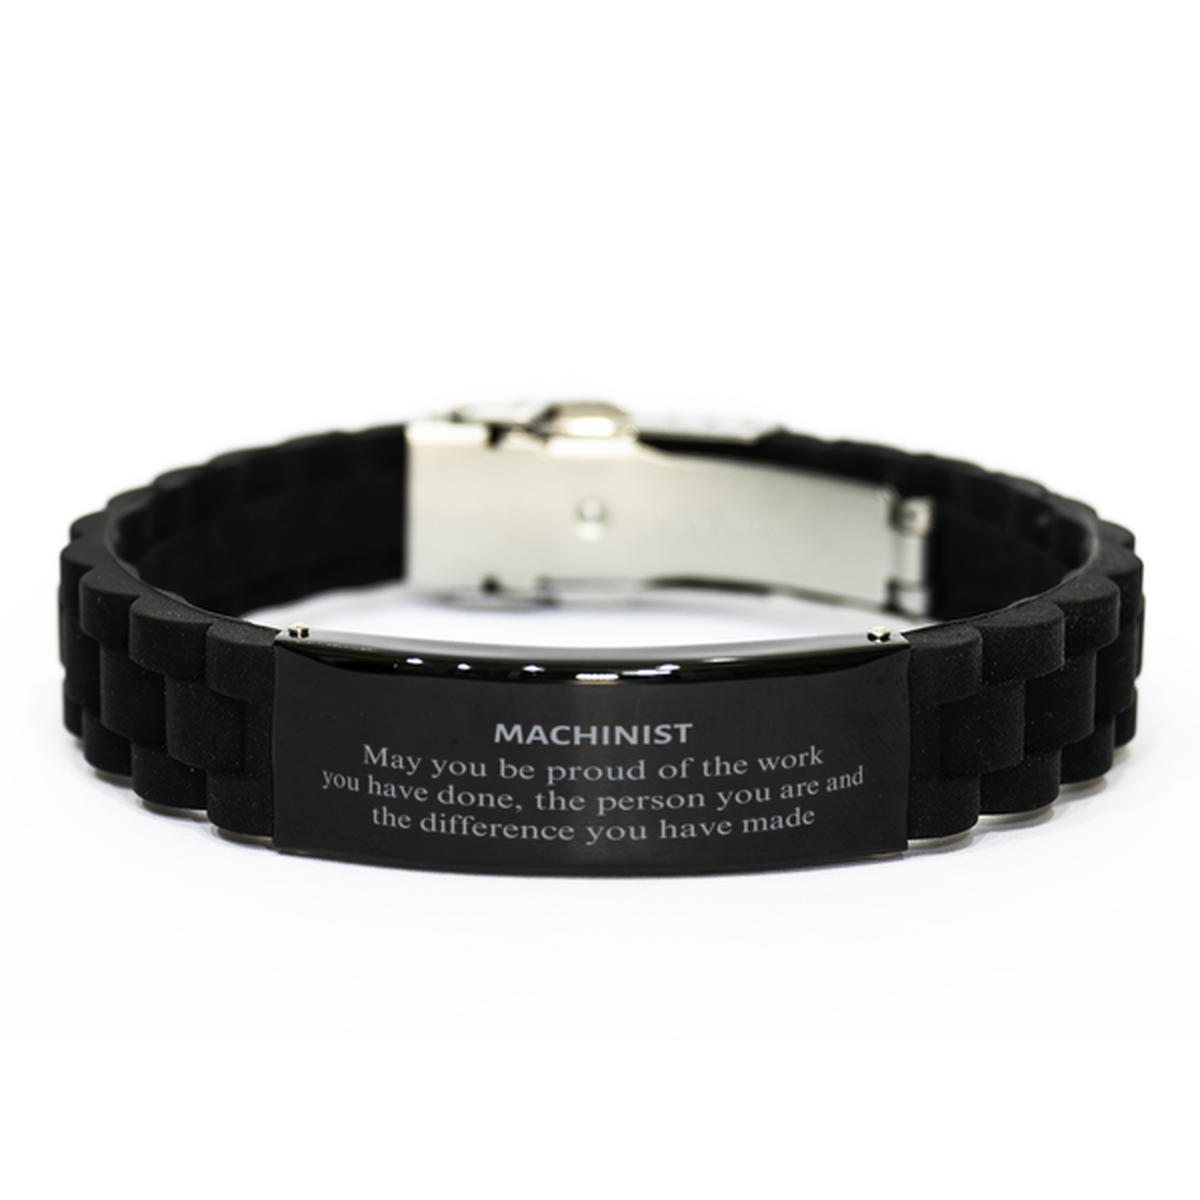 Machinist May you be proud of the work you have done, Retirement Machinist Black Glidelock Clasp Bracelet for Colleague Appreciation Gifts Amazing for Machinist